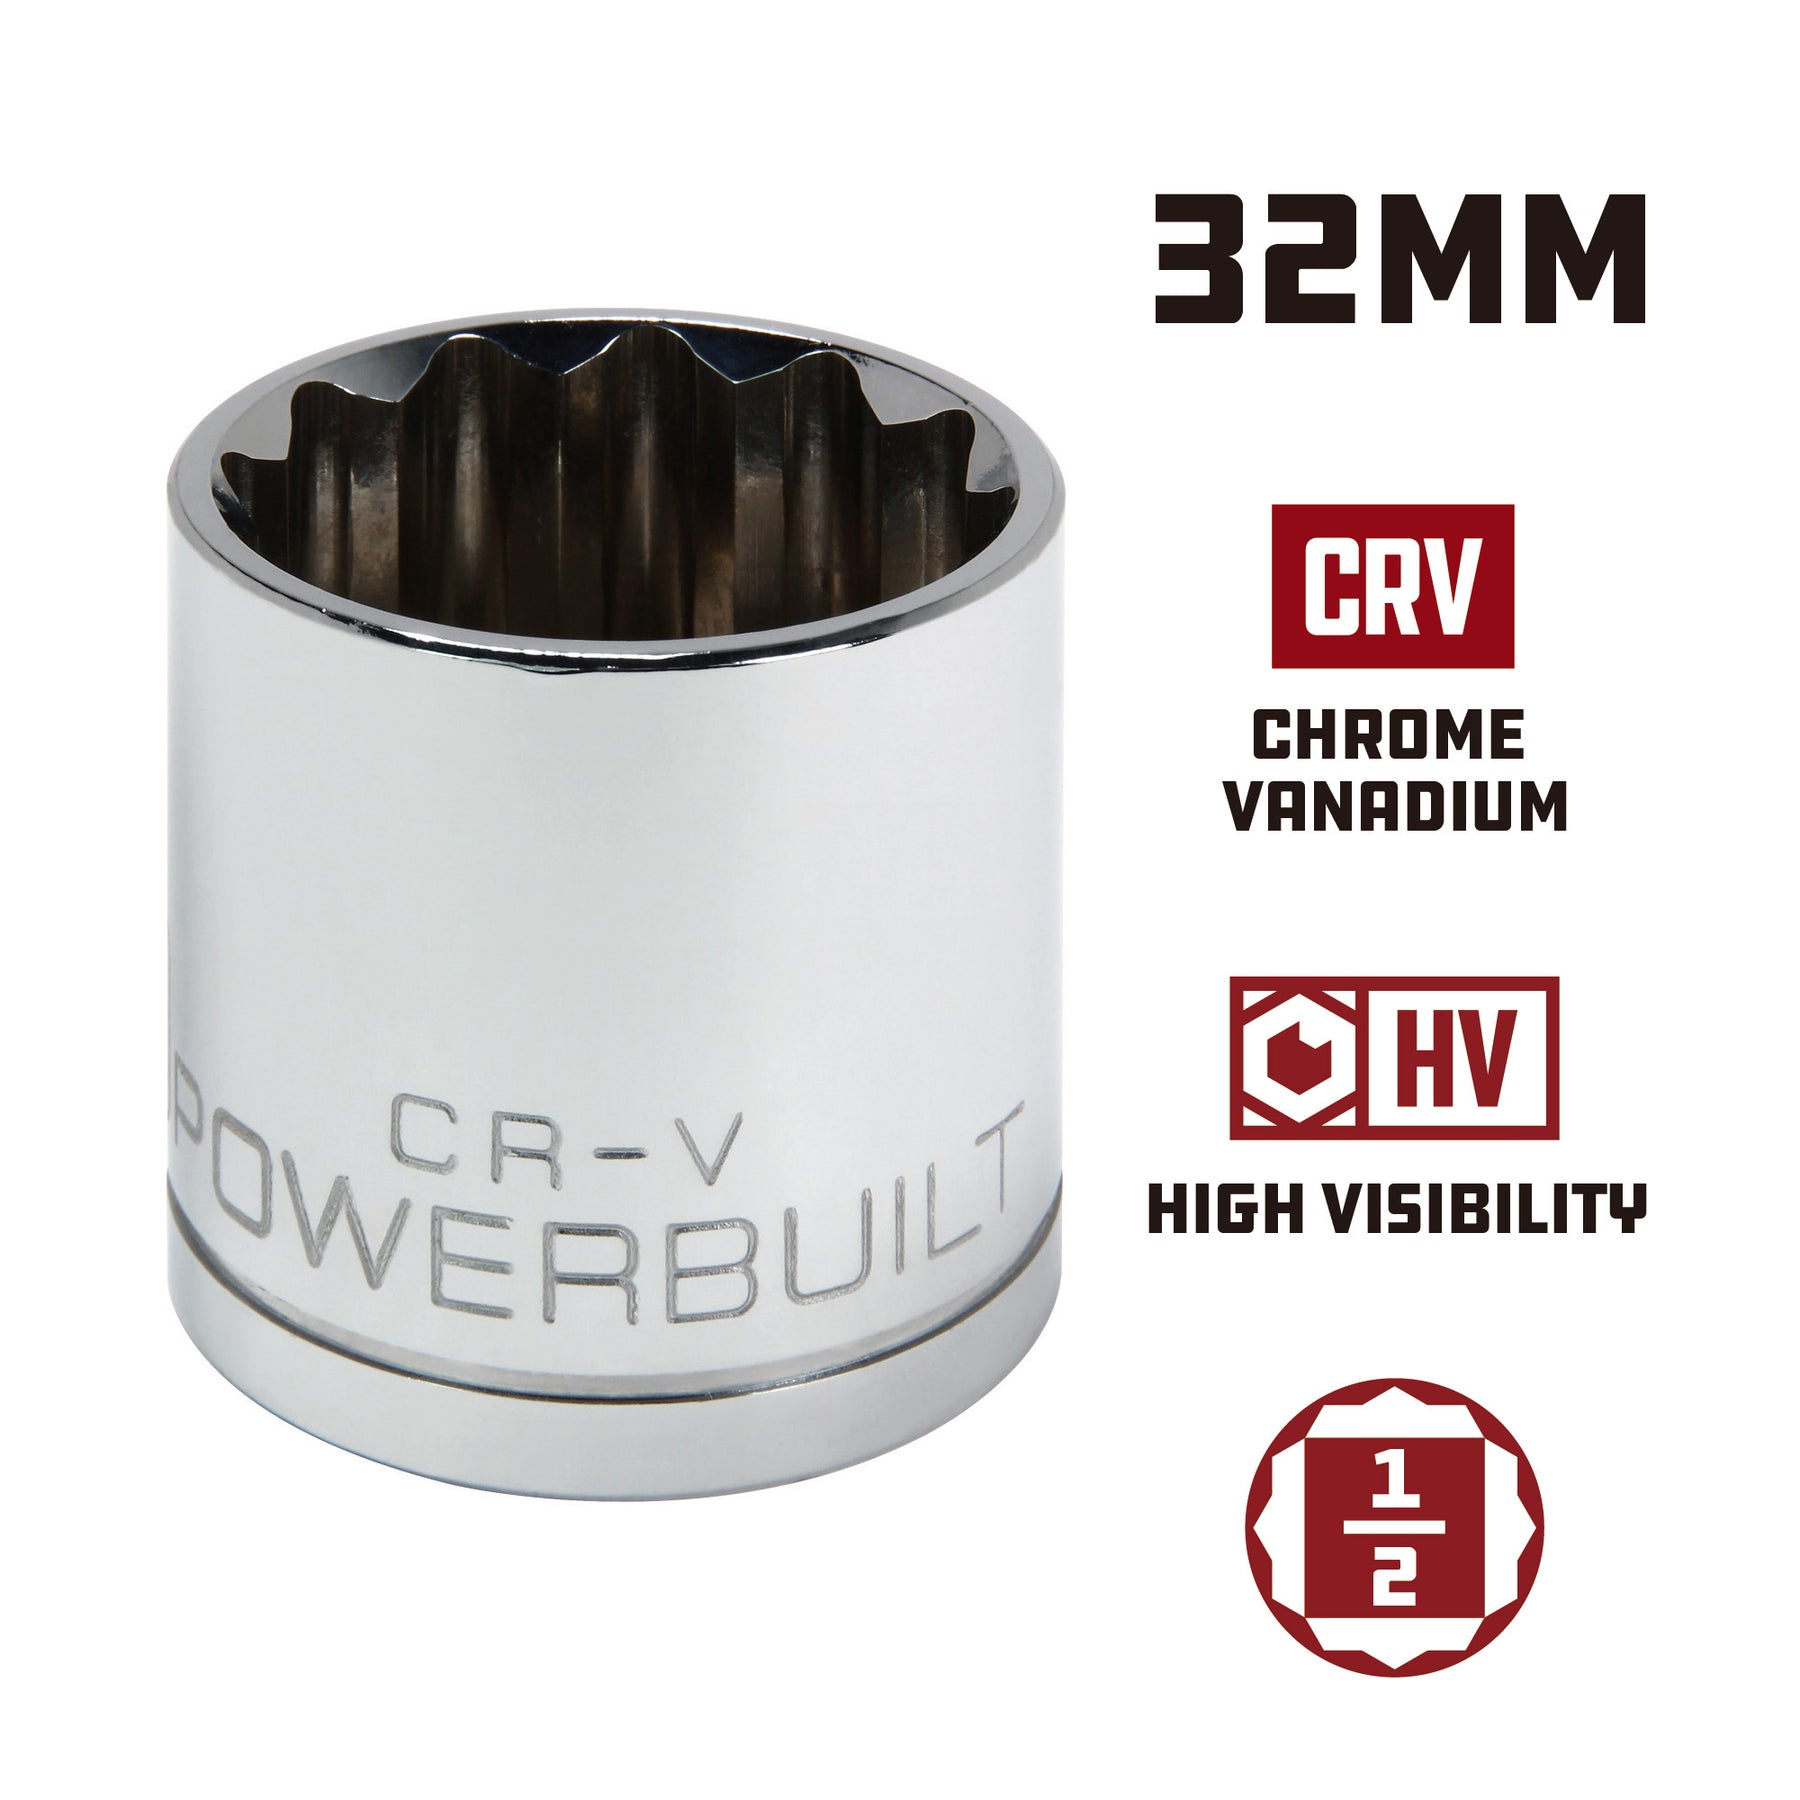 1/2 Inch Drive x 32 MM 12 Point Shallow Socket